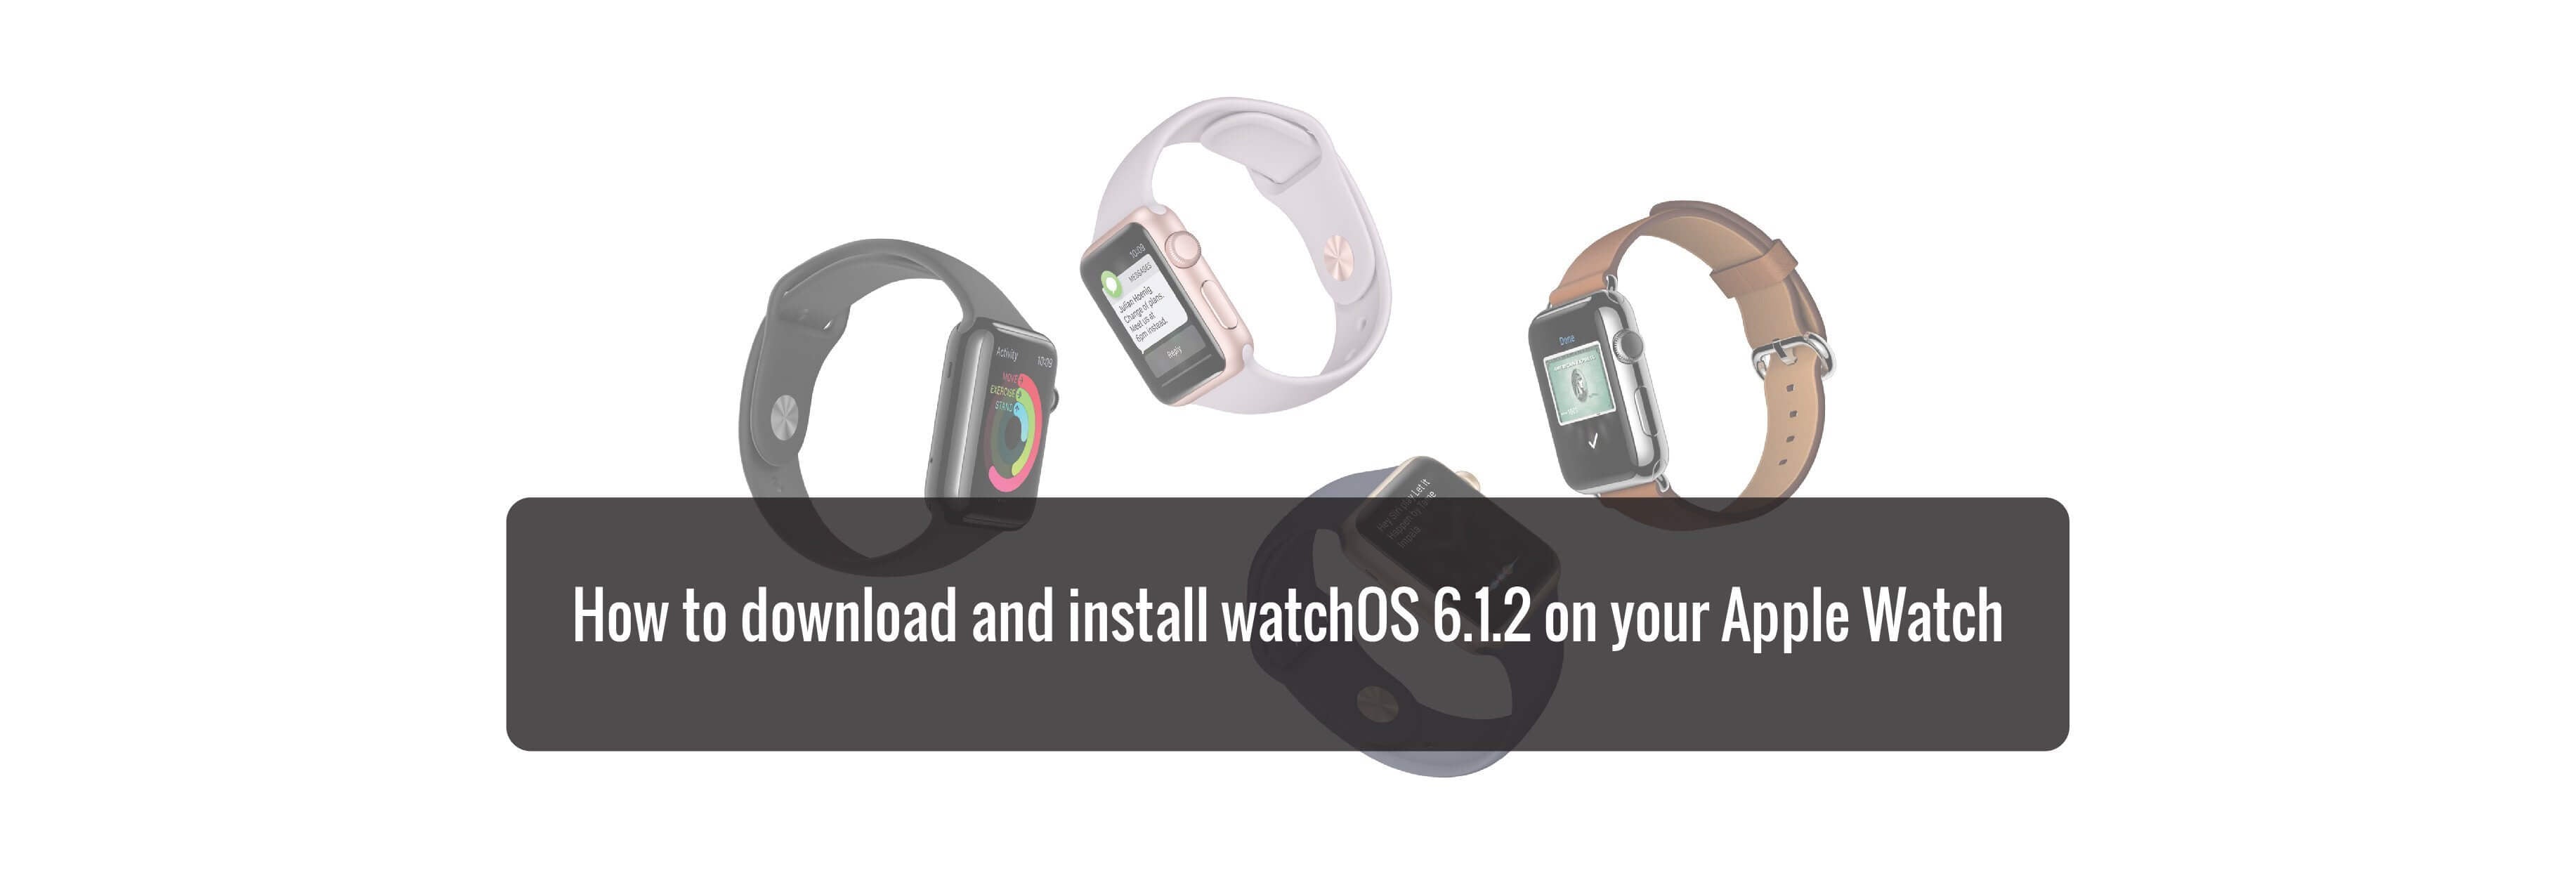 How to download and install watchOS 6.1.2 on your Apple Watch